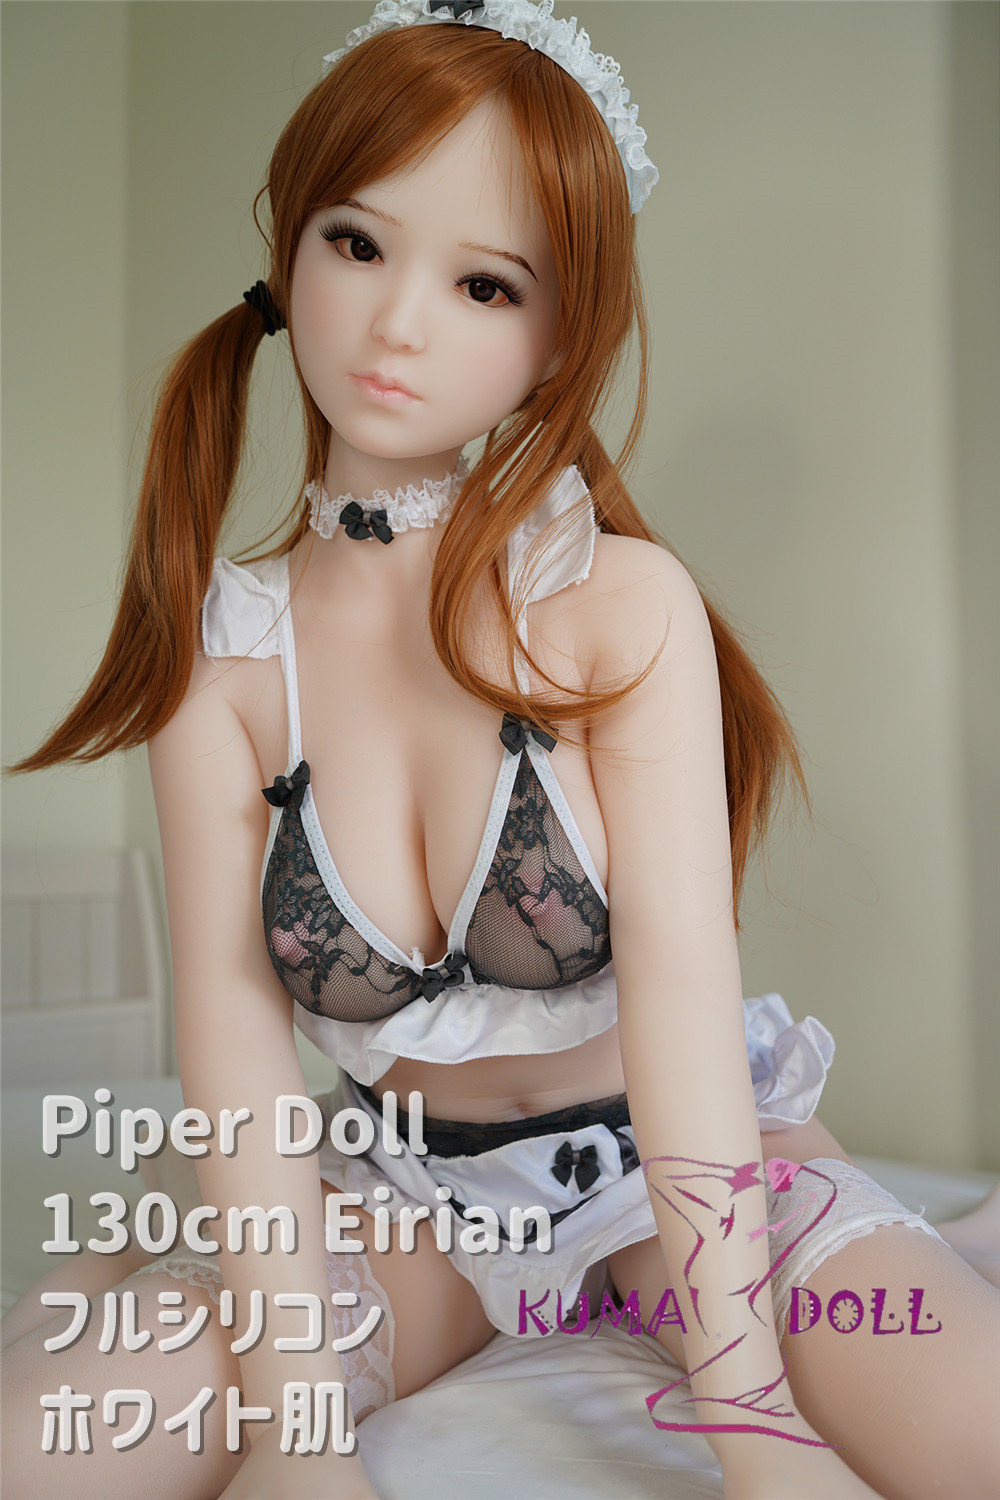 Full doll for adult PiperDoll Newly Launched 130cm Eirian Seamless